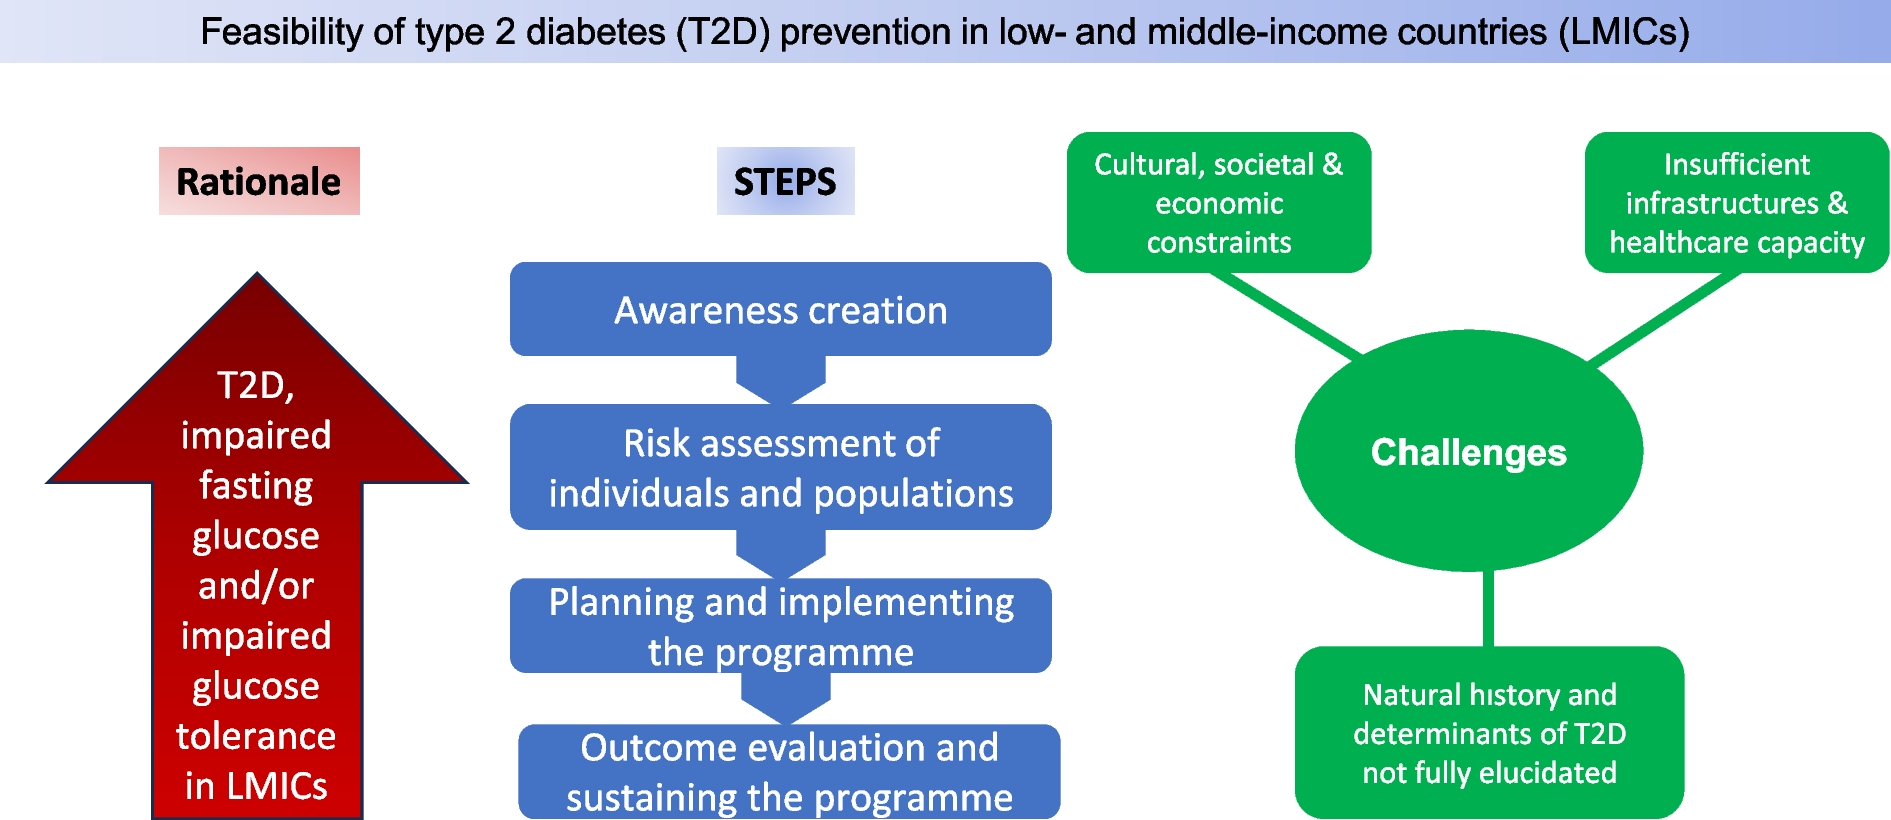 Feasibility of prevention of type 2 diabetes in low- and middle-income countries